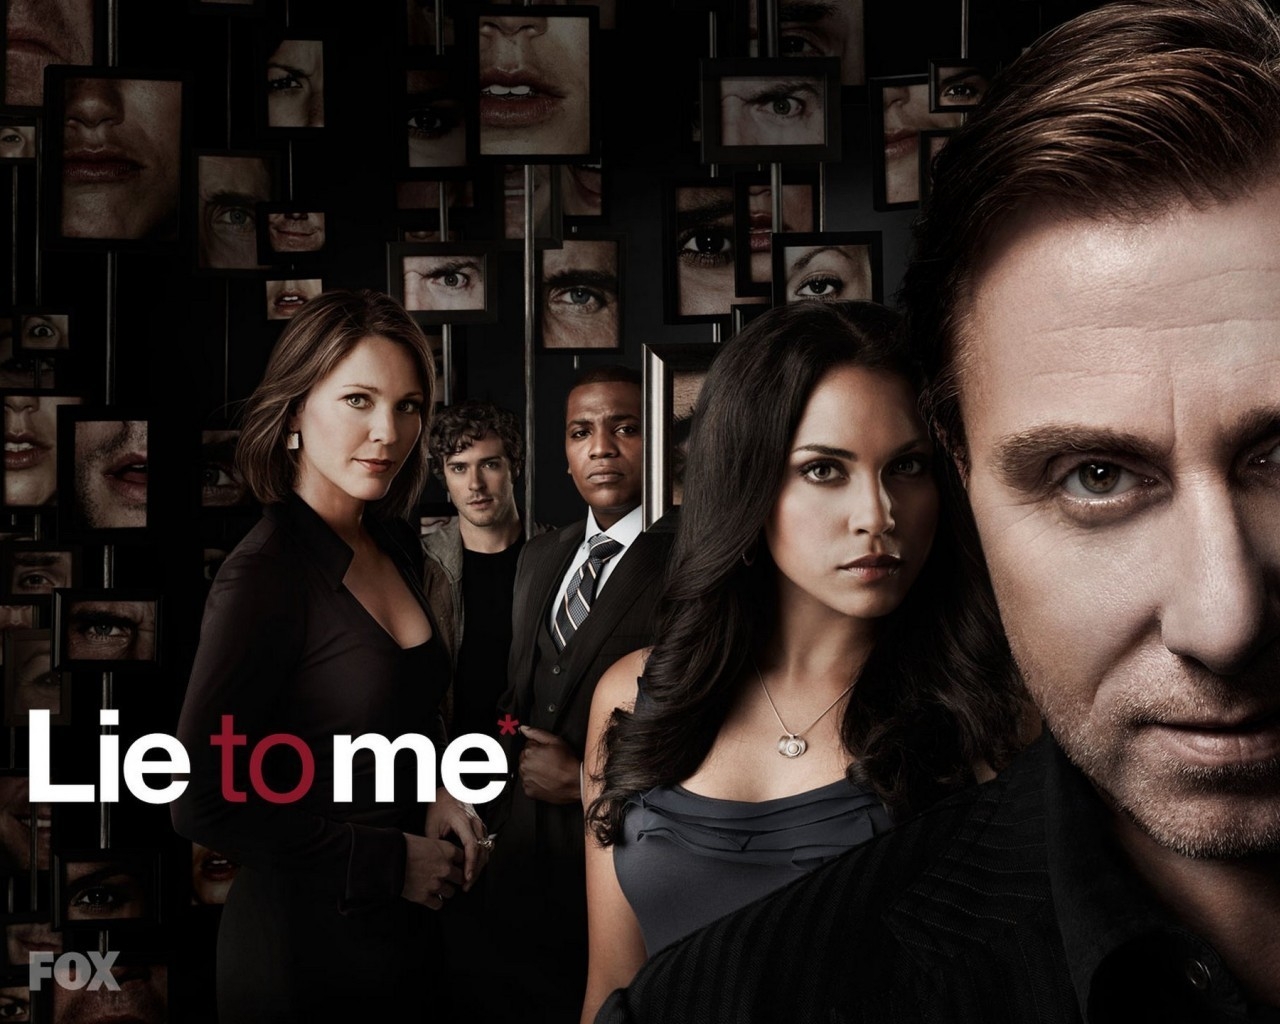 Lie to Me Movie Poster for 1280 x 1024 resolution